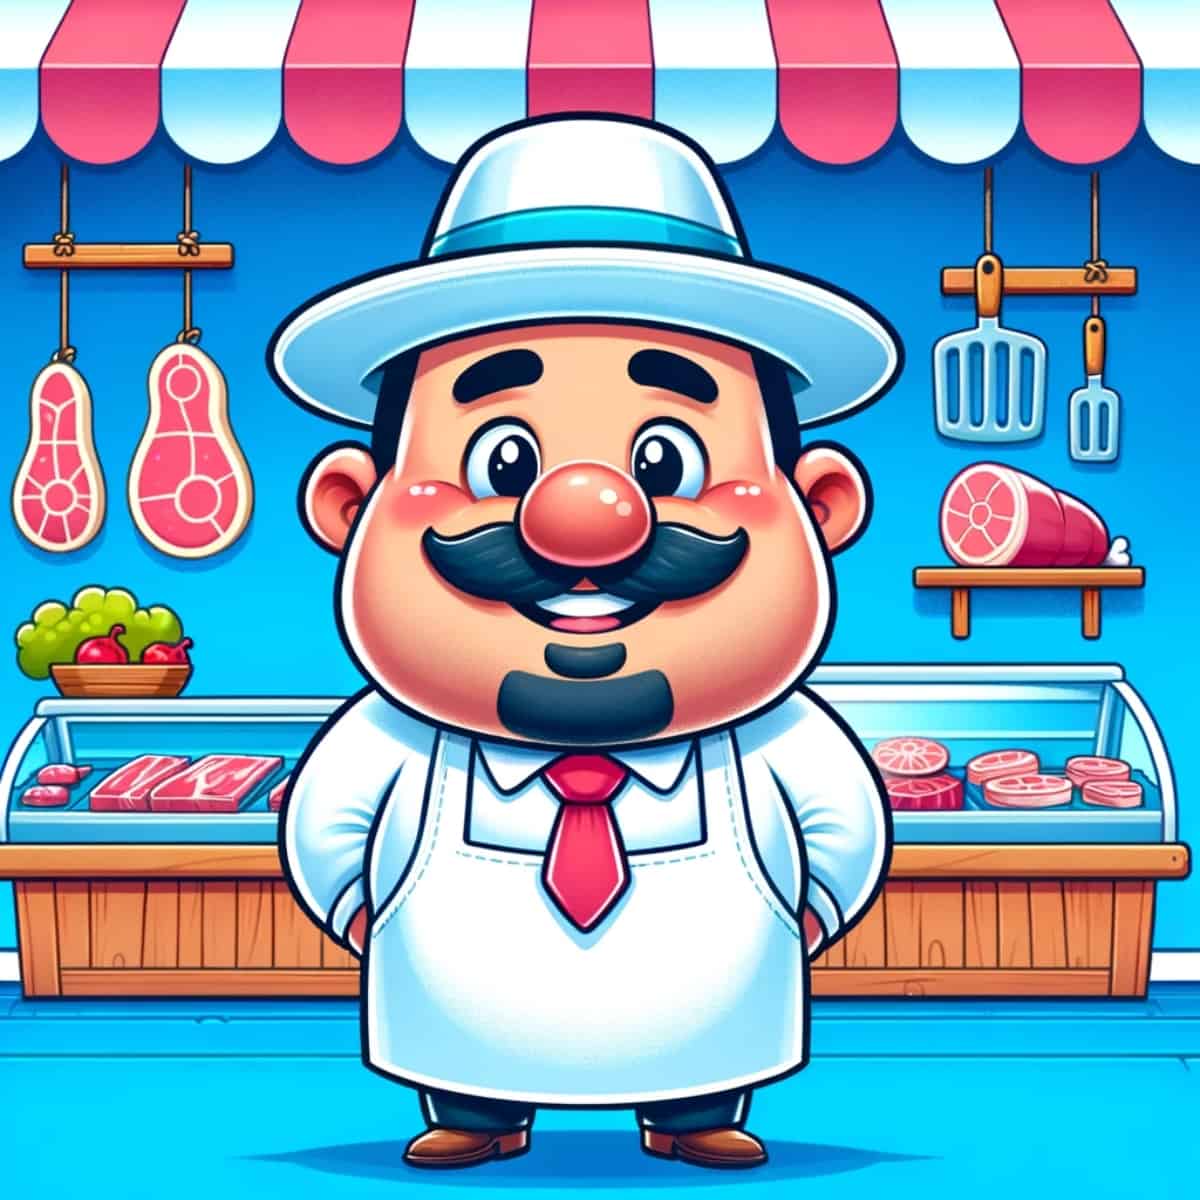 A cartoon graphic of a butcher  in his shop that looks funny and is a family friendly picture on a blue background.